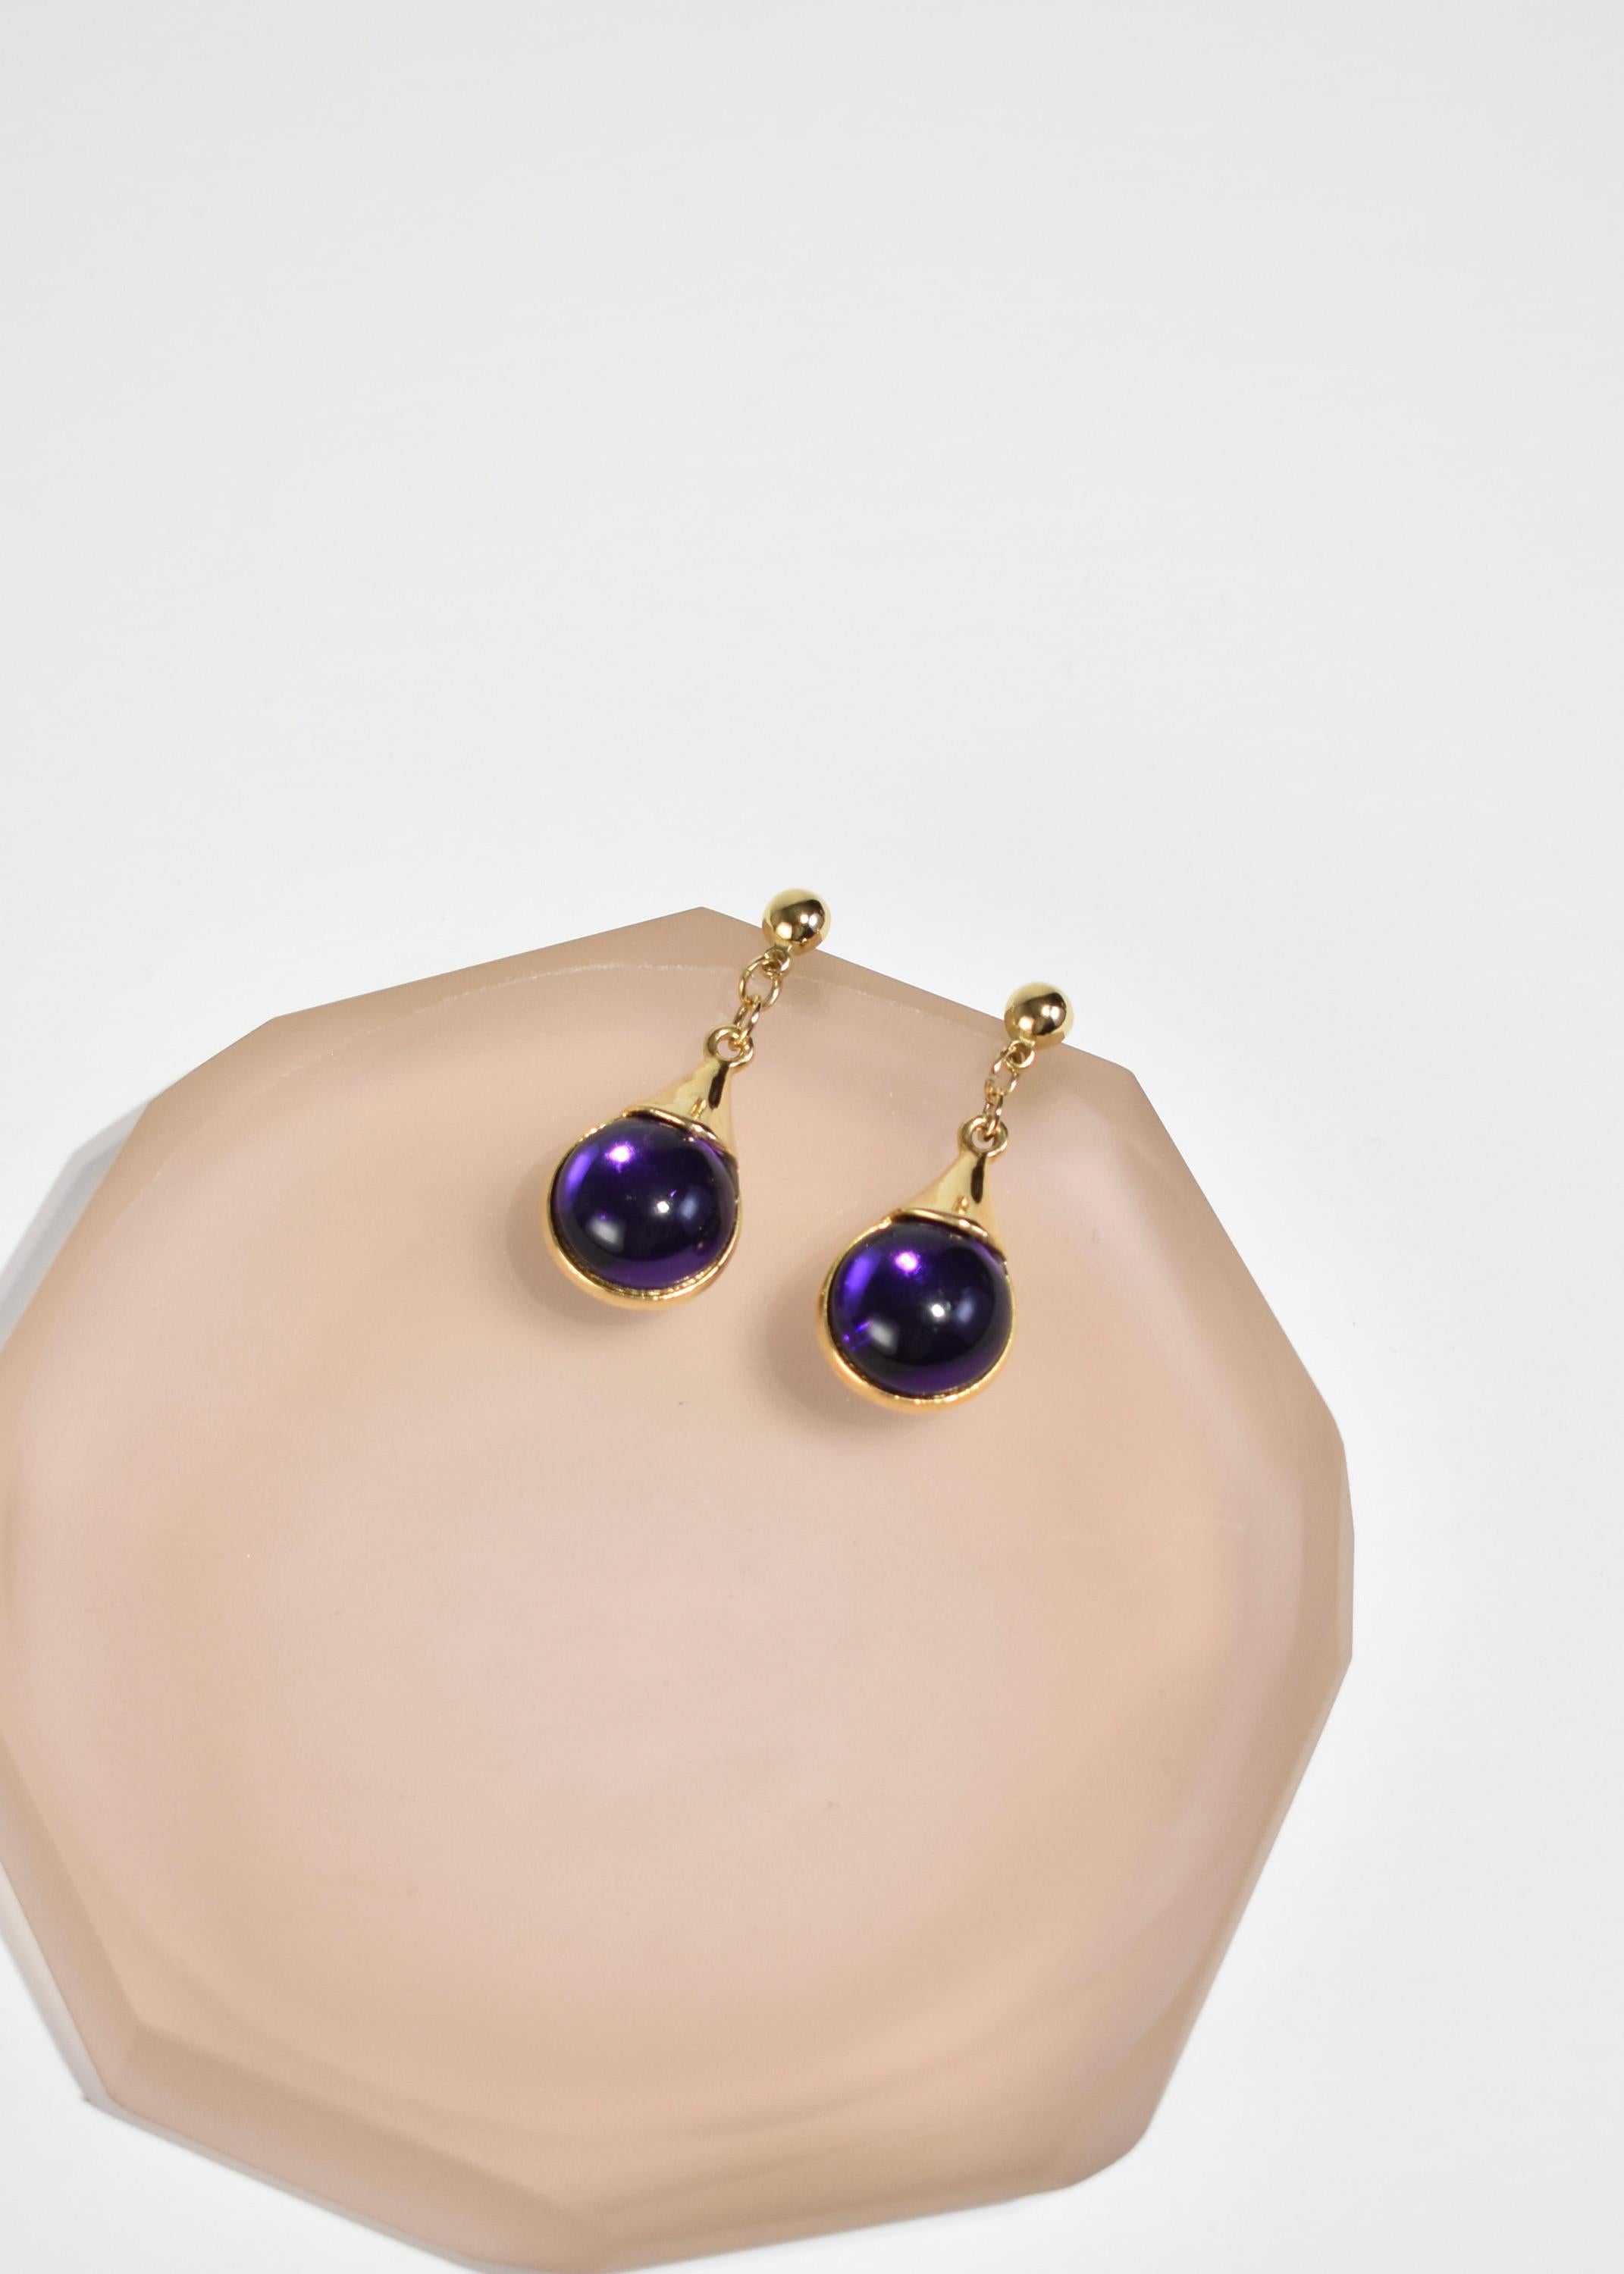 Sphere Drop Earrings In Good Condition For Sale In Richmond, VA